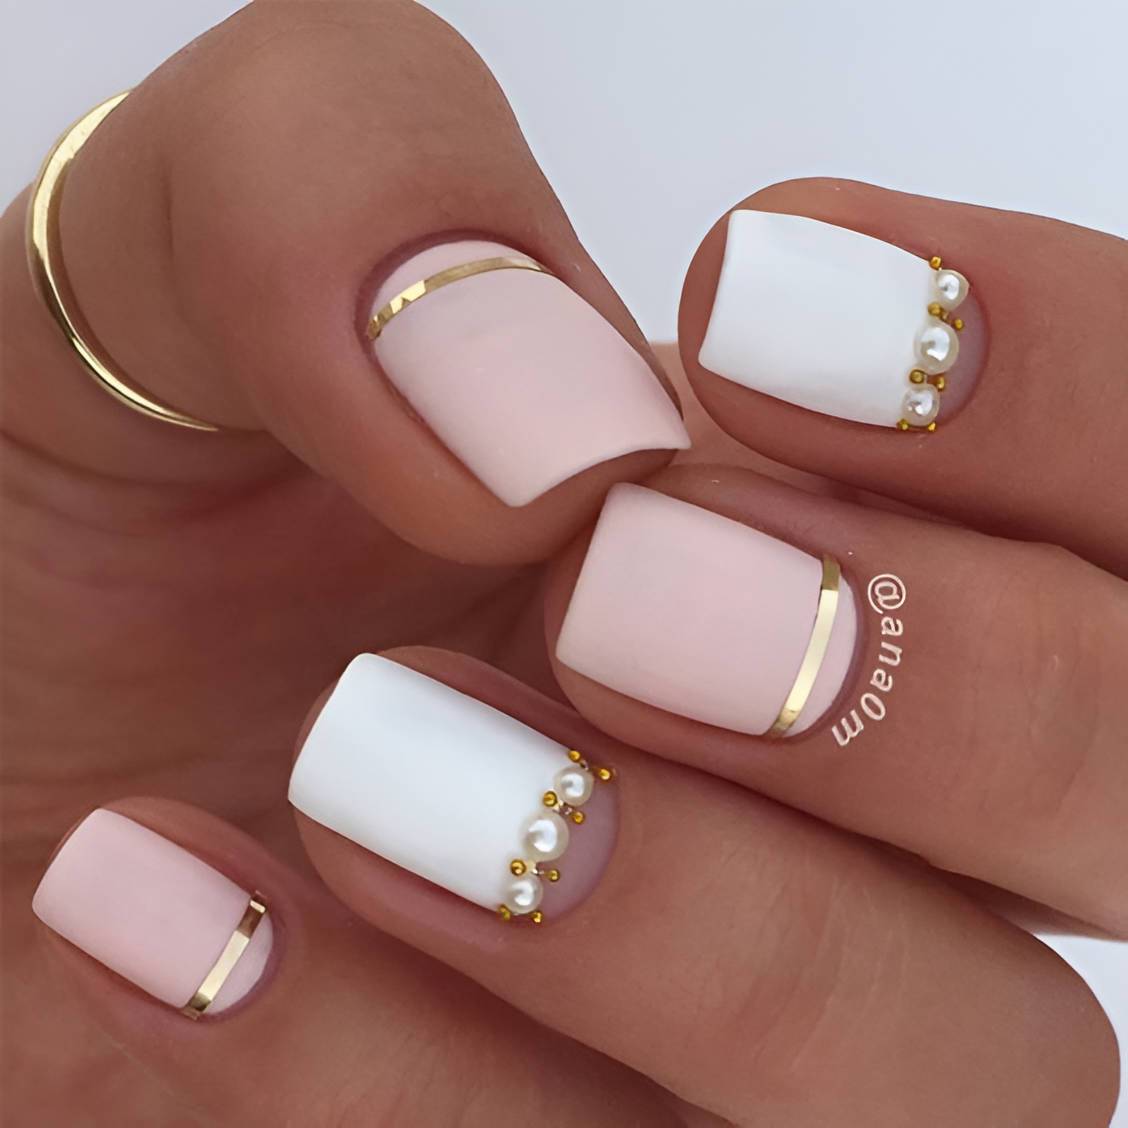 30 Gorgeous Prom Nail Designs Every Girl Needs To Copy - 223